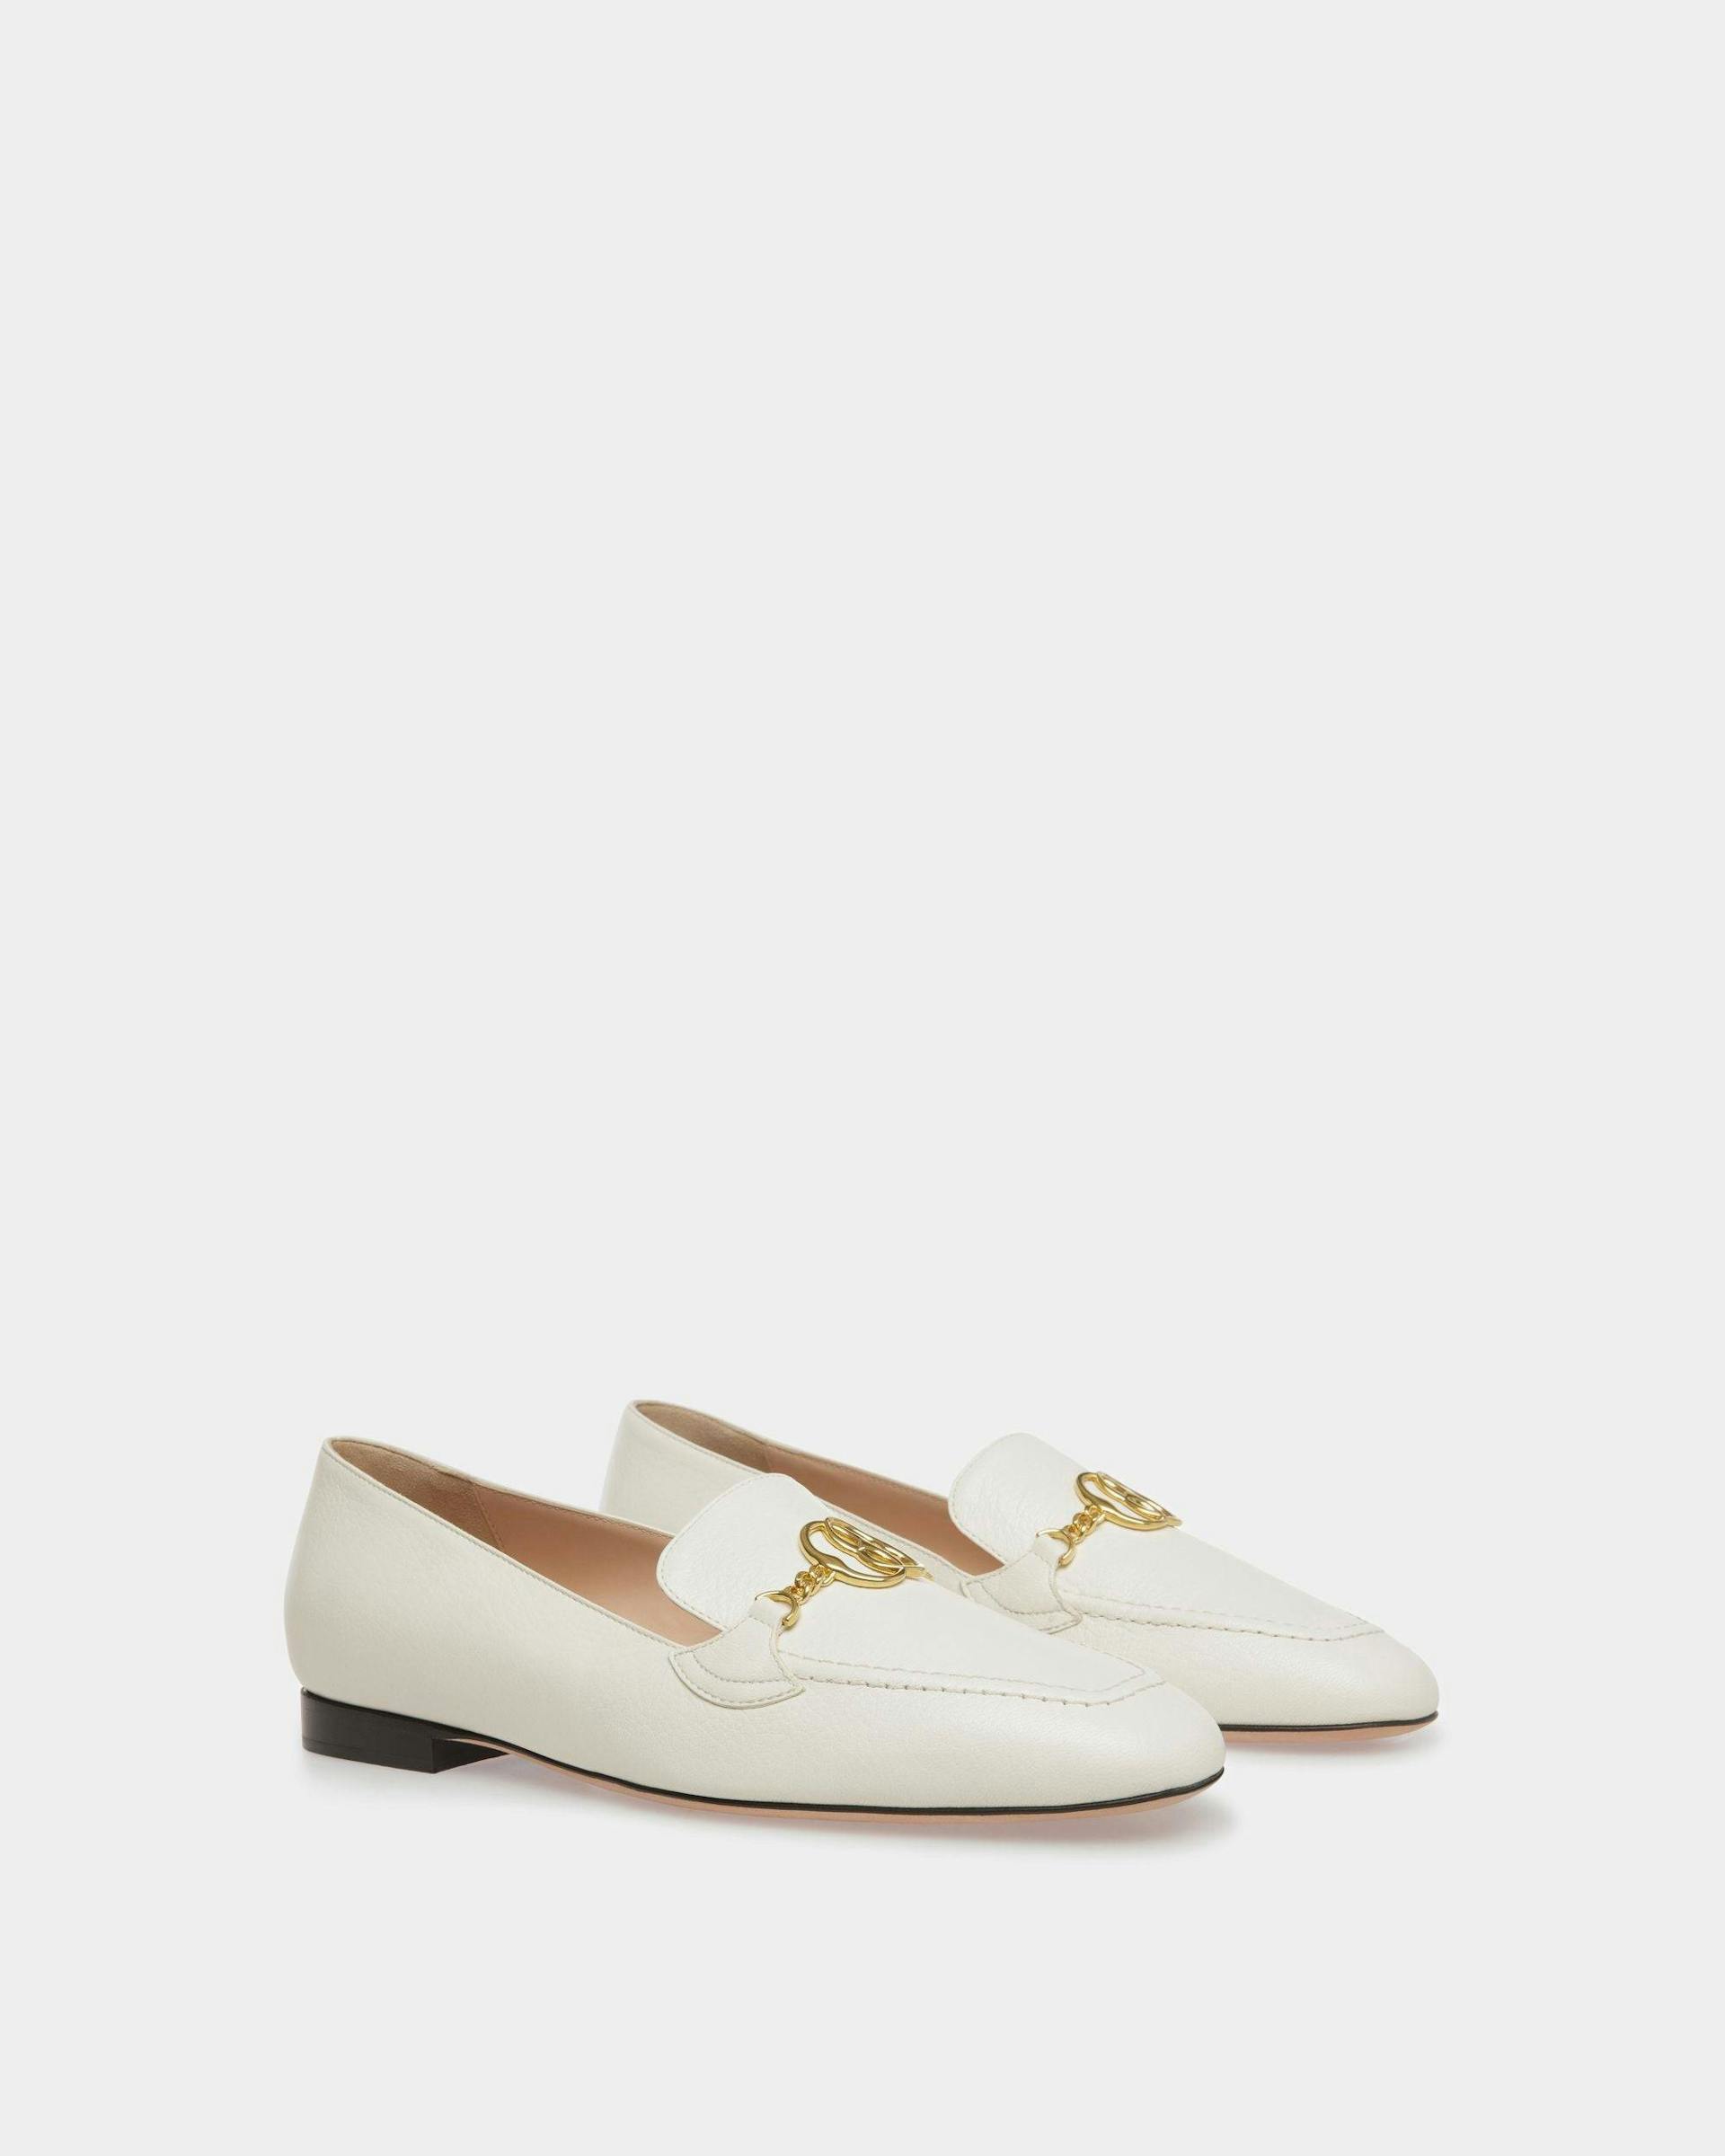 Women's Emblem Loafers In Bone Leather | Bally | Still Life 3/4 Front